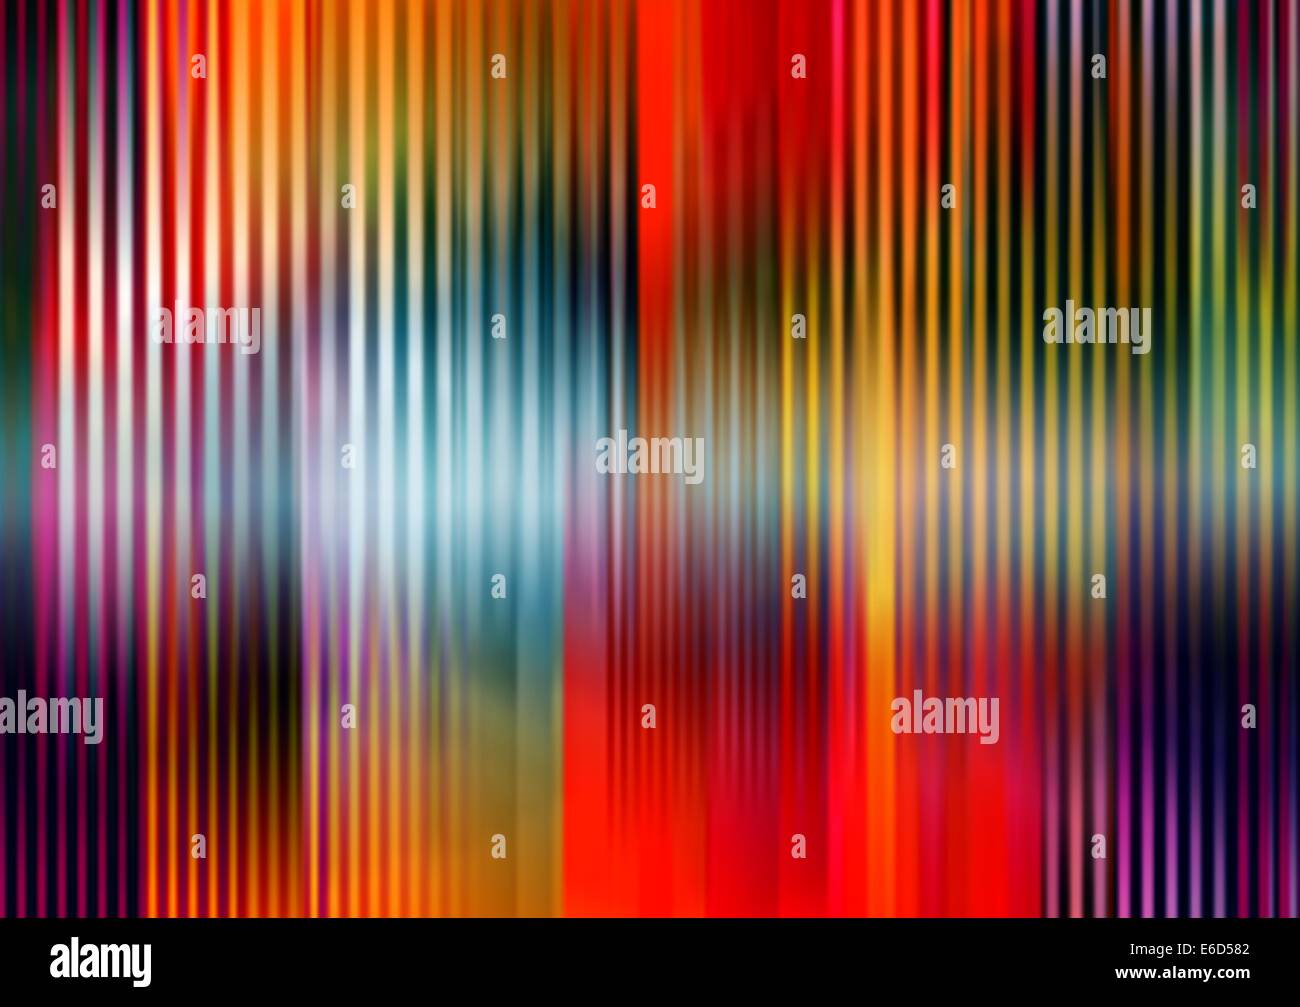 Tie Dye Stripe Stock Photos, Images and Backgrounds for Free Download